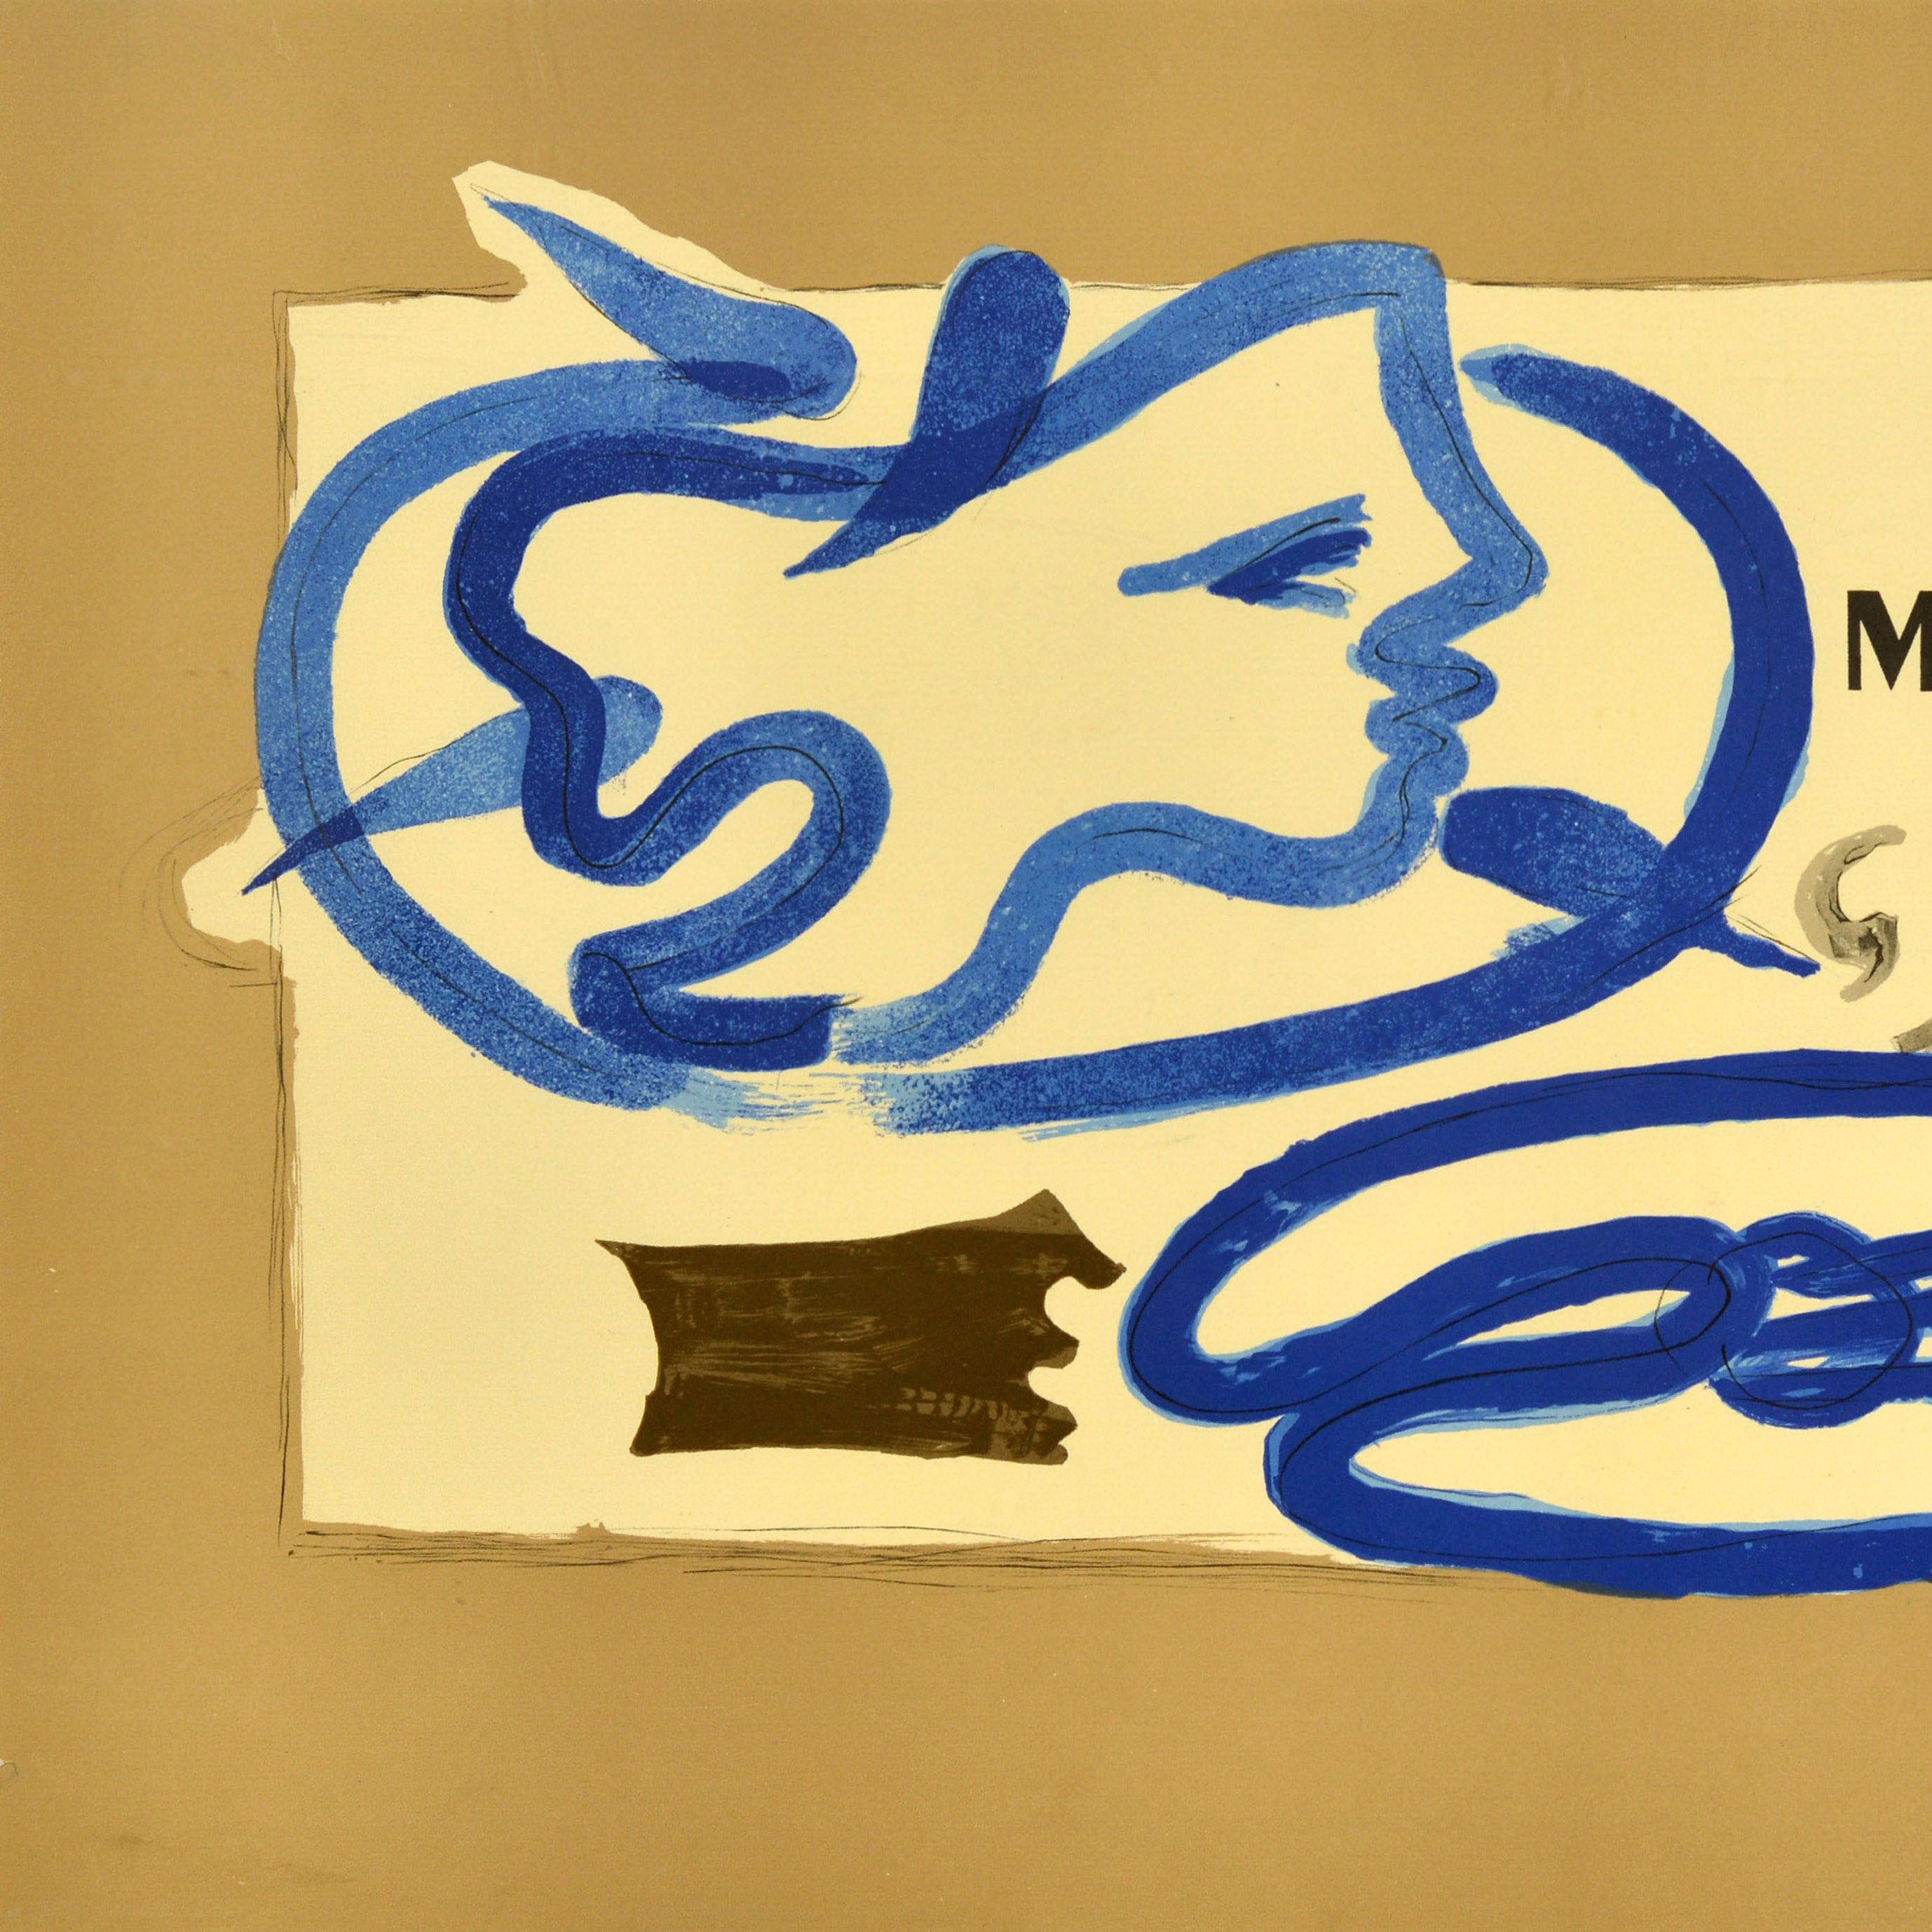 Original vintage advertising poster for an exhibition of work by the French artist Georges Braque (1882-1963) at Galerie Maeght featuring an abstract design titled Profil a la Palette / Palette Profile depicting a silhouette of a person in blue and